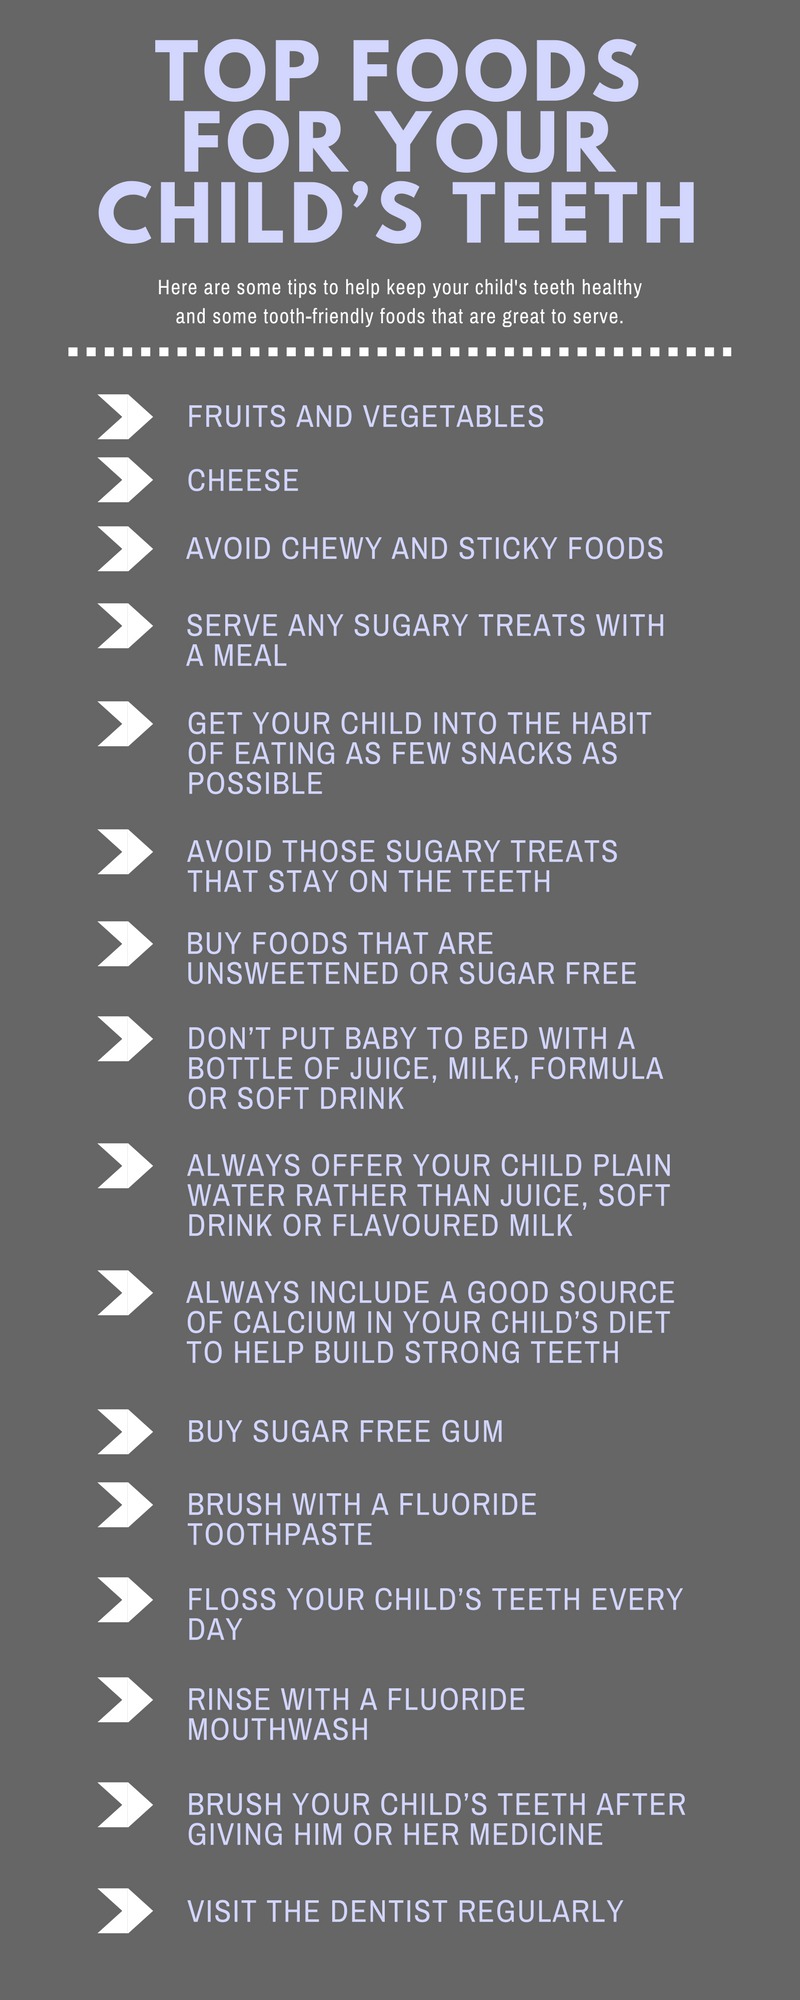 Top foods for your childs teeth